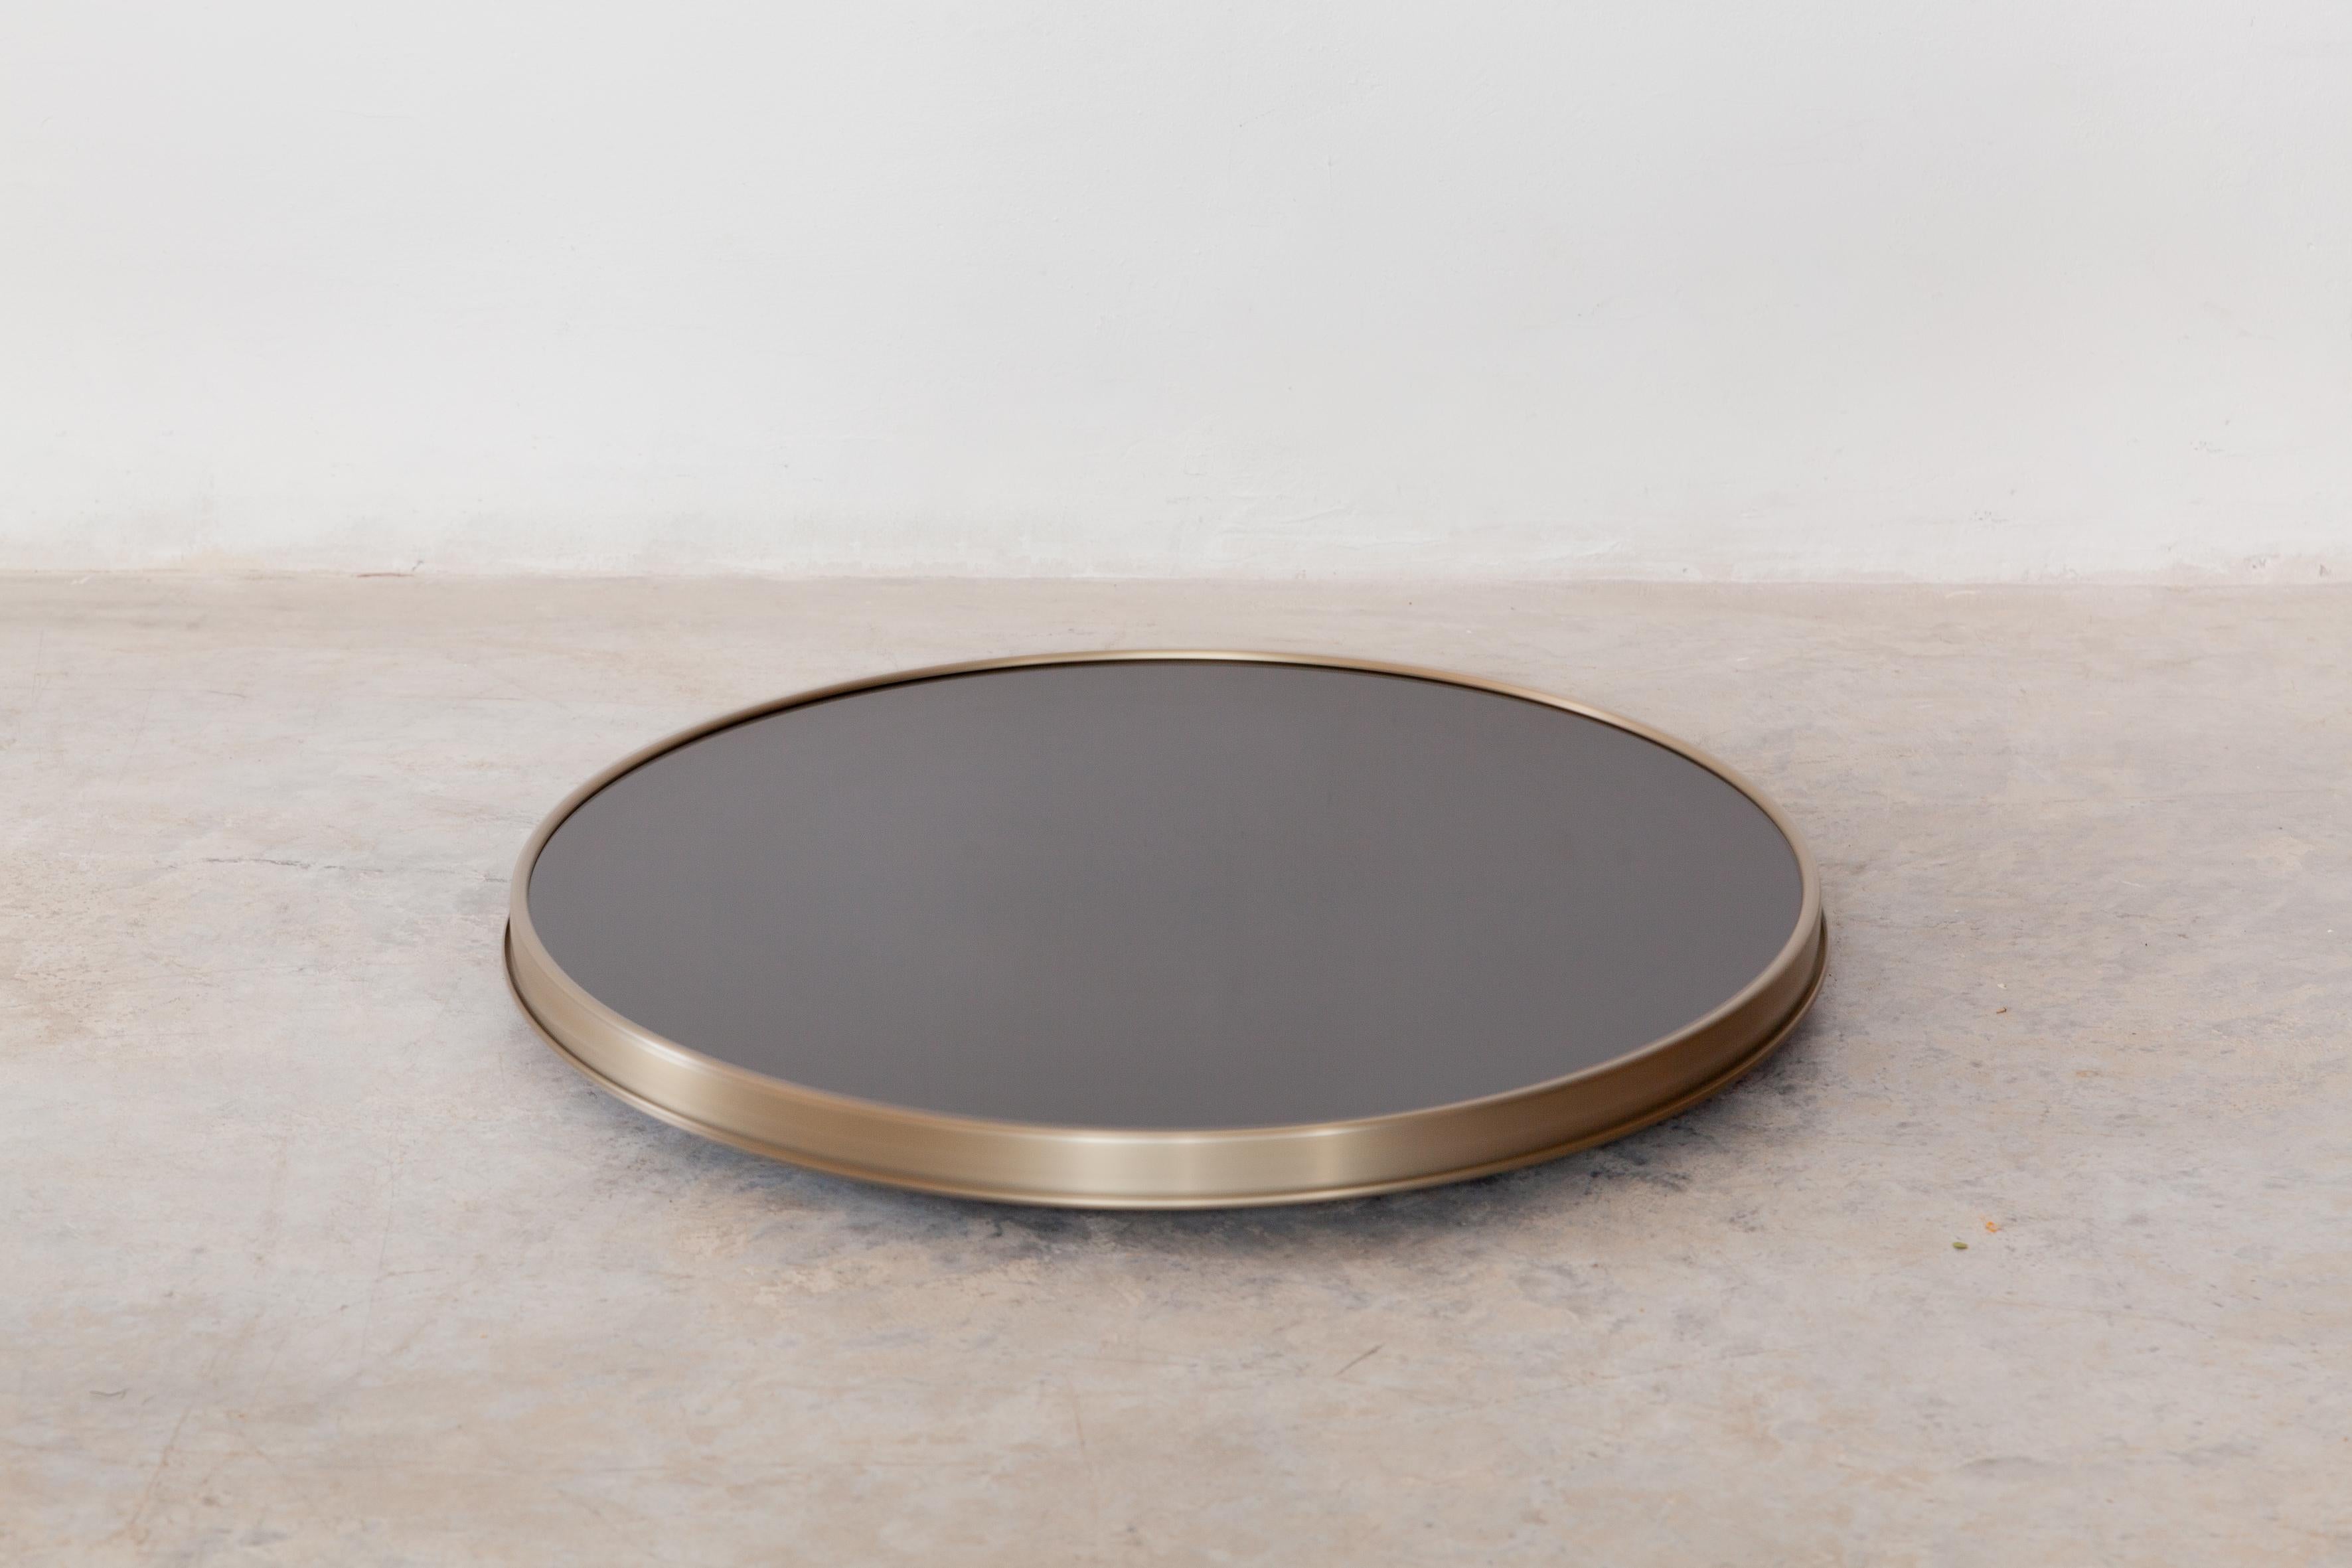 Tray shaped round silver plated cocktail tray with black glasstop, bottom retained by four brackets, lined with a wooden floor.
This is a wonderful piece of modernist design. In good condition - slight surface wear.